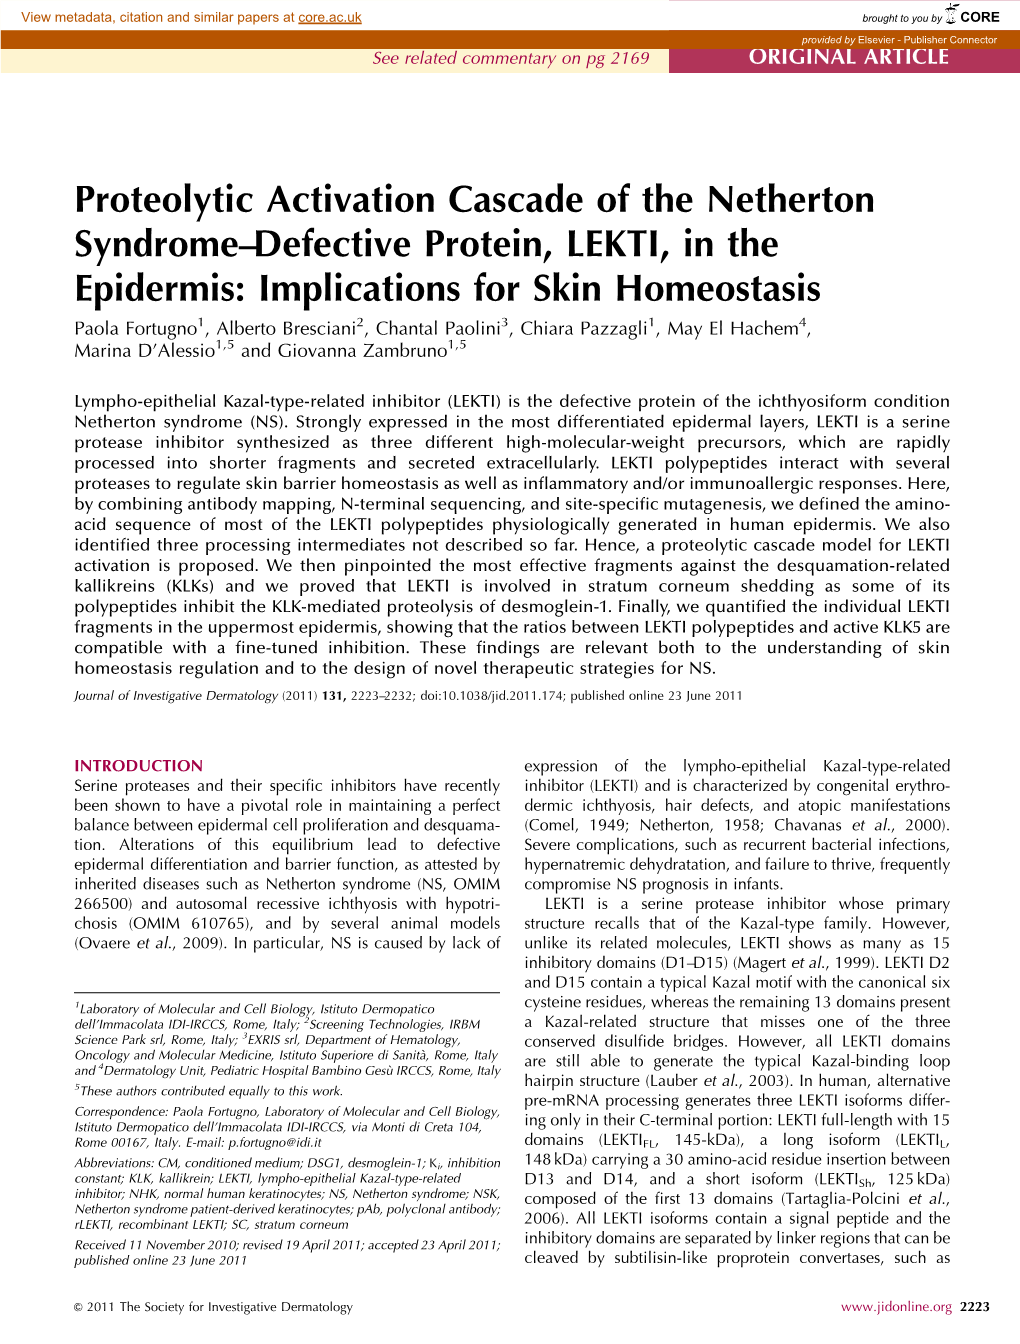 Proteolytic Activation Cascade of the Netherton Syndrome–Defective Protein, LEKTI, in the Epidermis: Implications for Skin